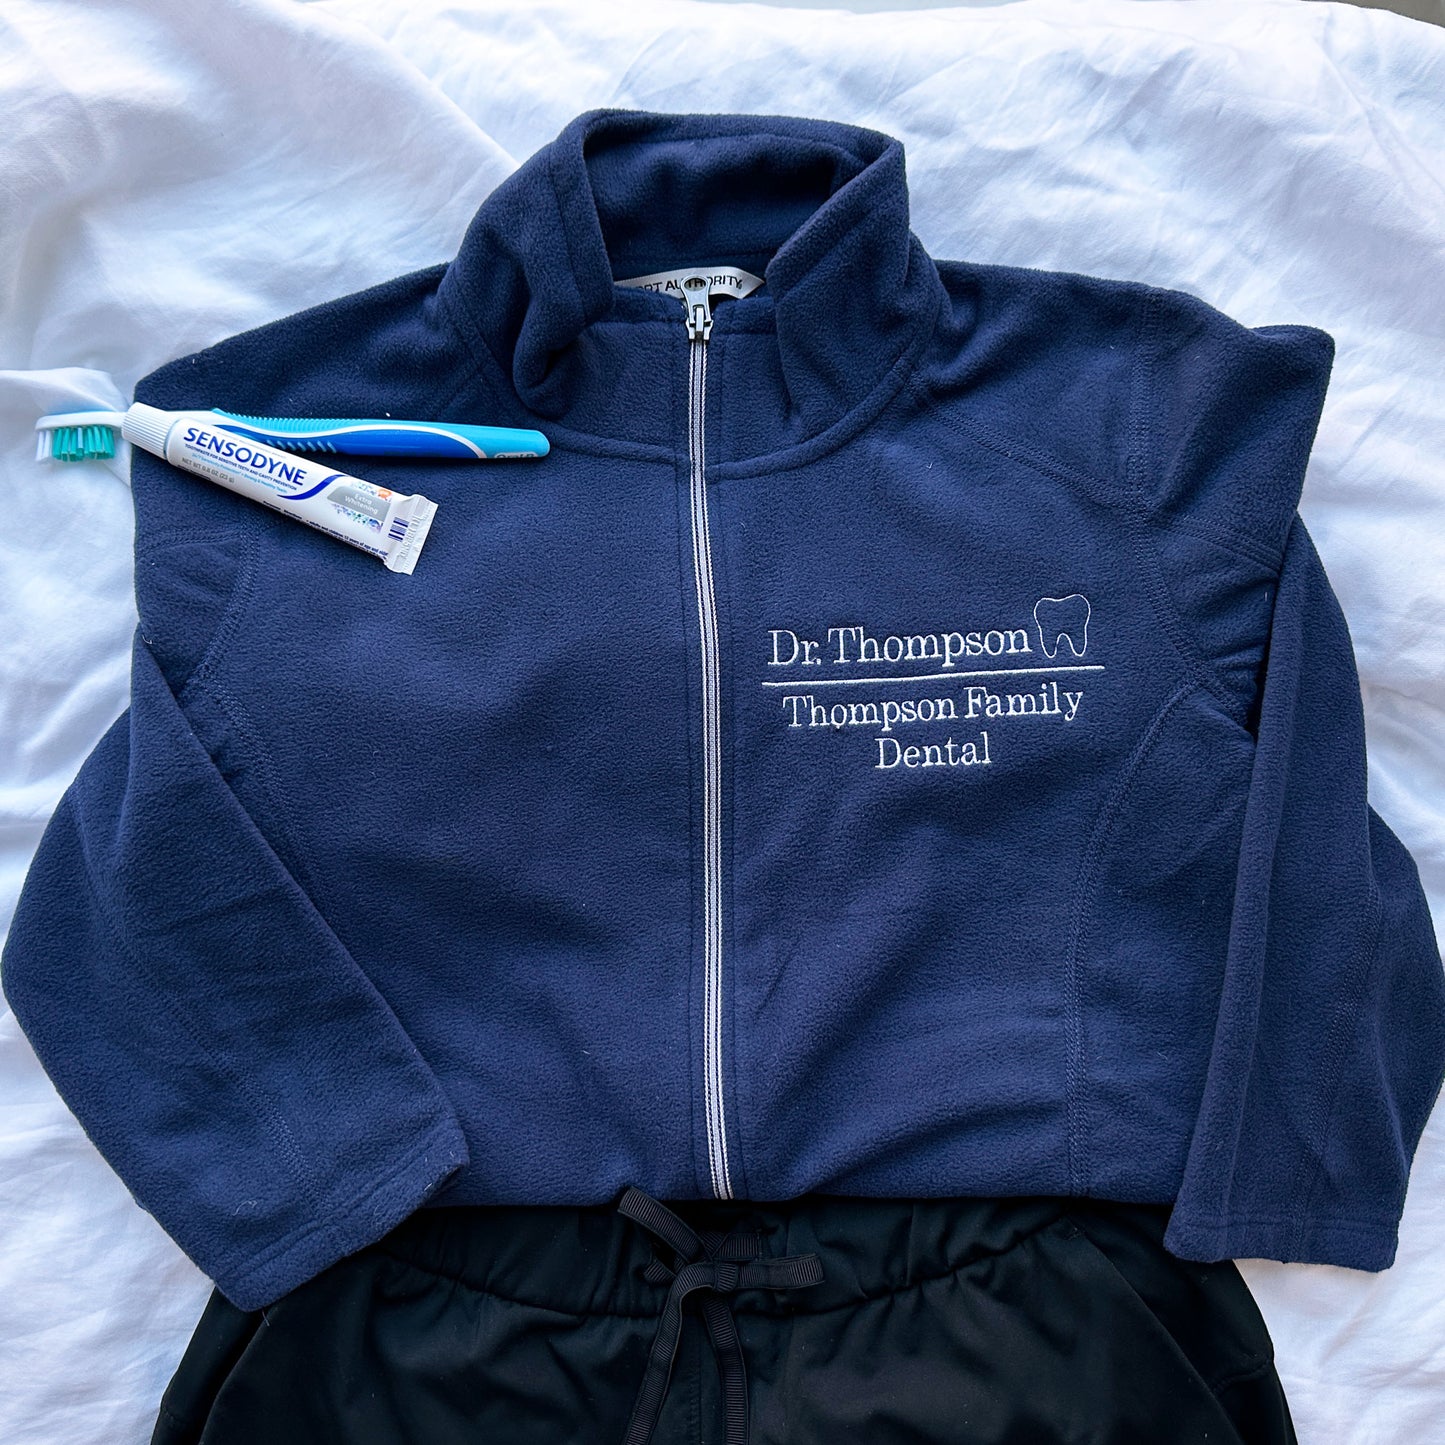 full zip navy fleece jacket with Dr, Thompson, Thompson family dental and mini outline tooth embroidered on the left chest on white thread styled with black scrubs and a toothbrush with toothpaste